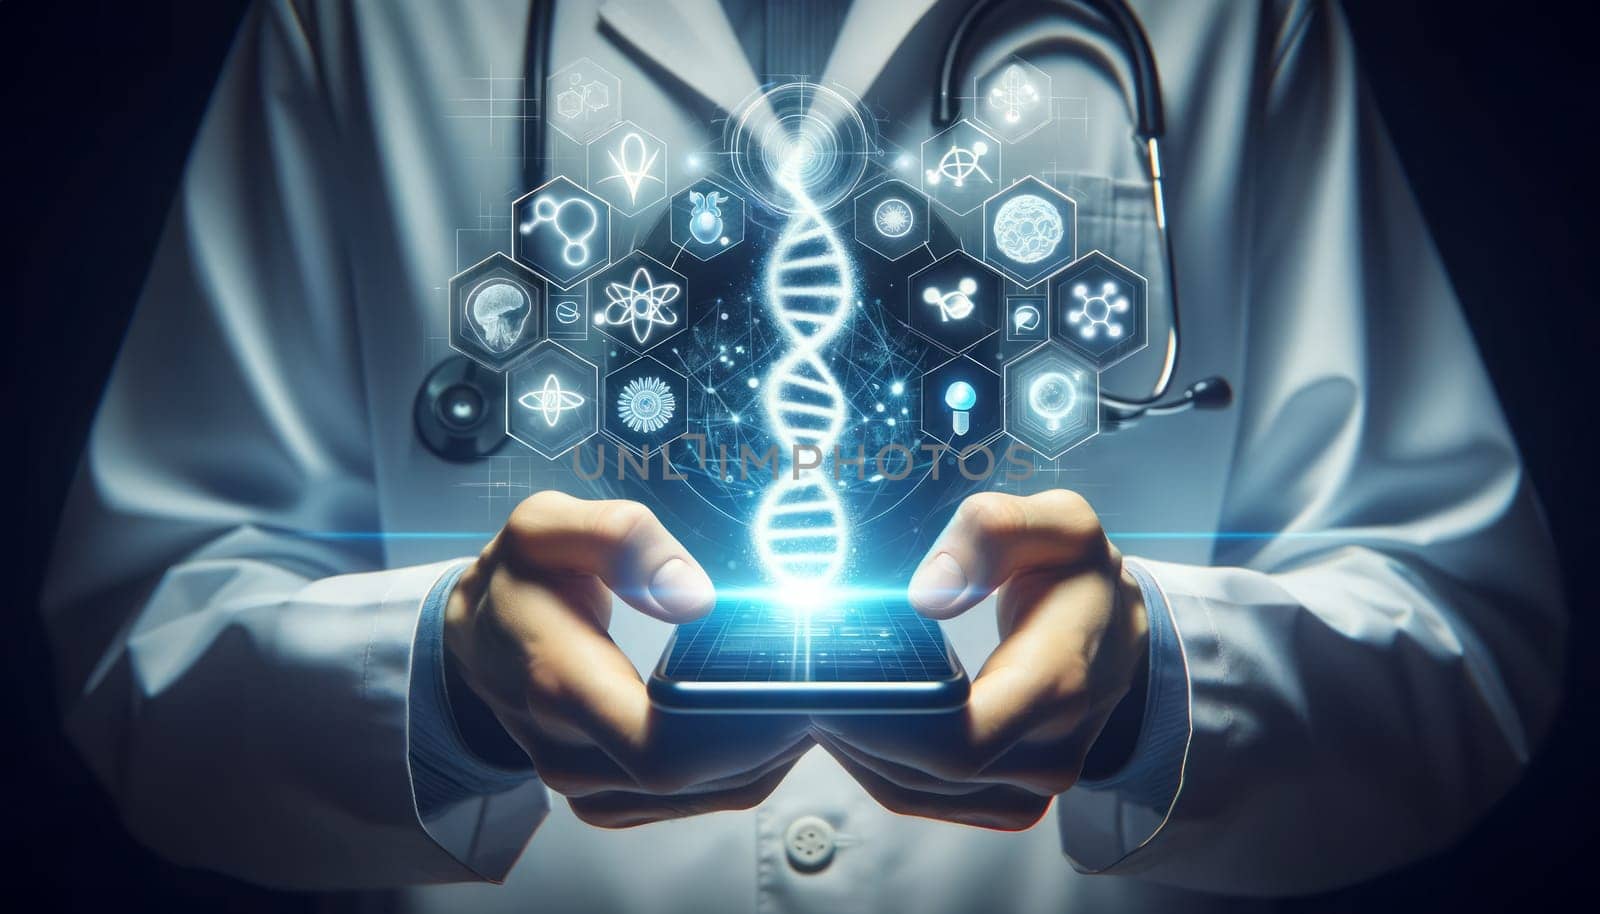 A wide digital illustration of a person in a white lab coat holding a smartphone. The smartphone screen is emitting a bright glow and holographic images of medical symbols like DNA helices, atoms, and cells, which are floating above the screen. The person is unidentifiable, focusing on the hands holding the device. The background is dark, emphasizing the luminous, high-tech display. The overall mood conveys a futuristic and innovative approach to medicine and technology.